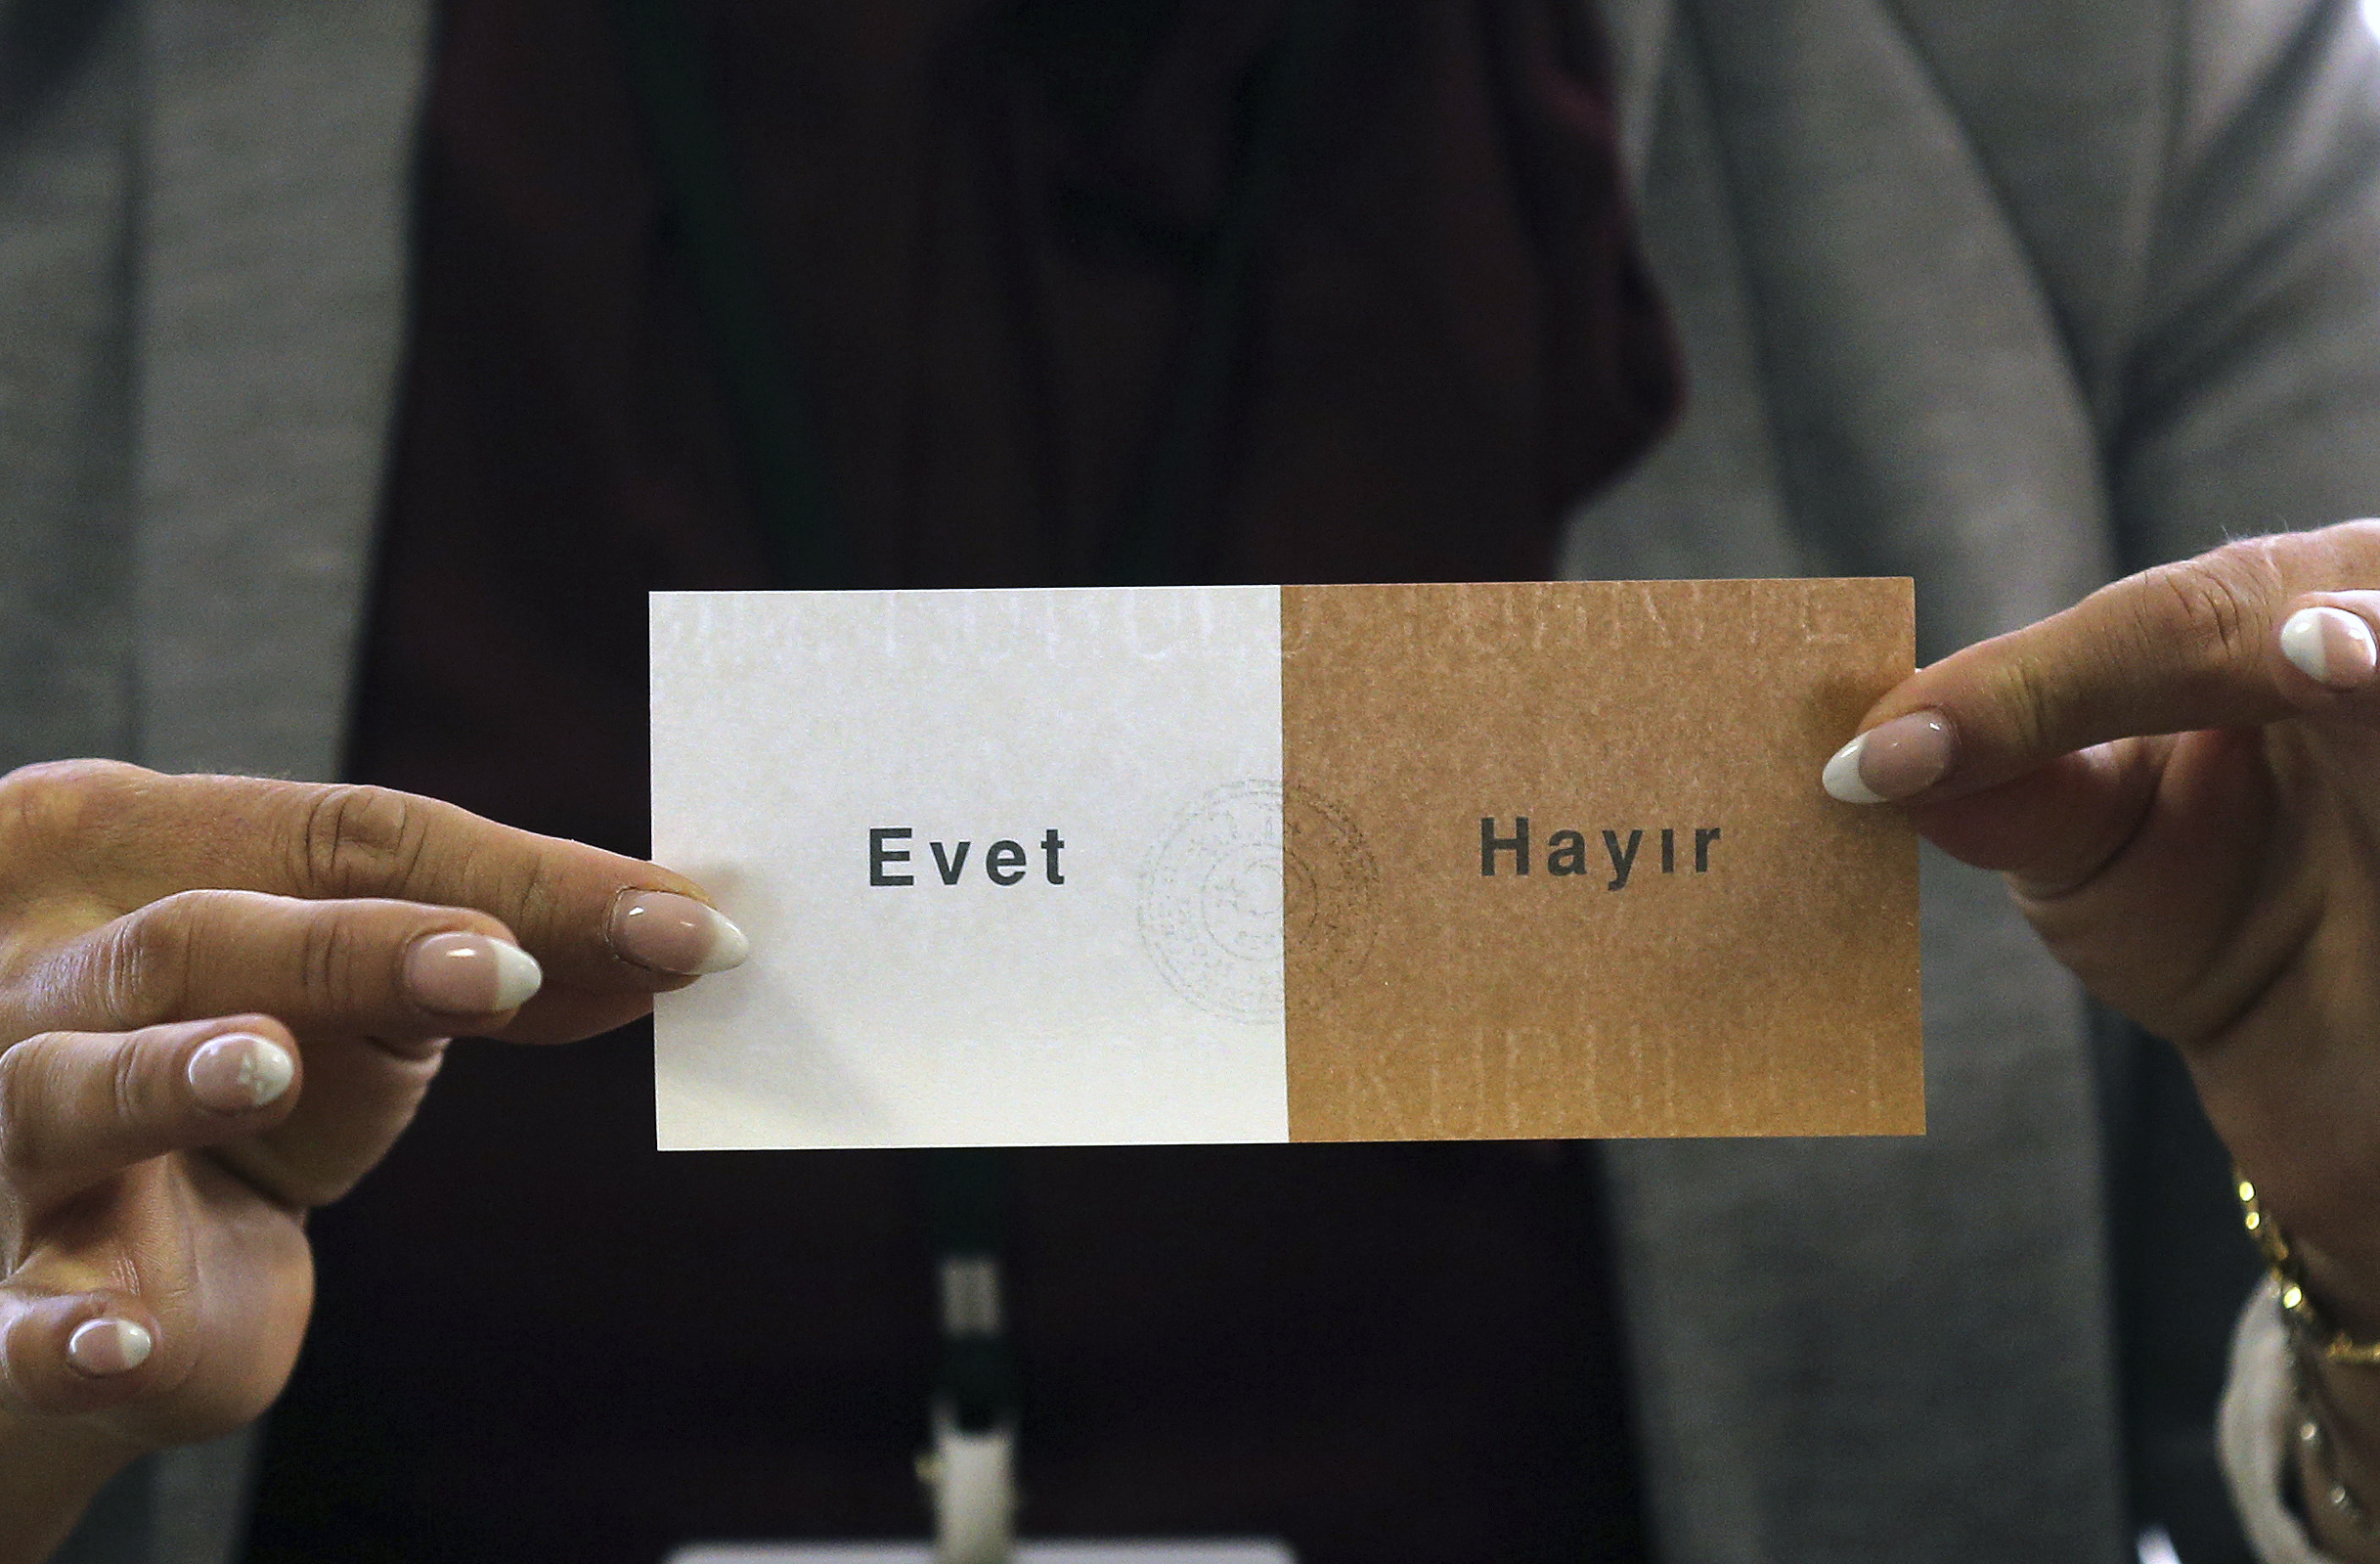 A Turkish female showing a ballot with the Turkish words for 'Yes' and 'No'('Evet' and 'Hayir') in a Turkish electoral polling station in Dortmund, Germany, 09 April 2017. The Turkish people of Germany are also called upon to vote on the controversial constitution plans of Turkish President Erdogan. The constitutional reform would give the head of state much more power in Turkey. Photo by: Ina Fassbender/picture-alliance/dpa/AP Images